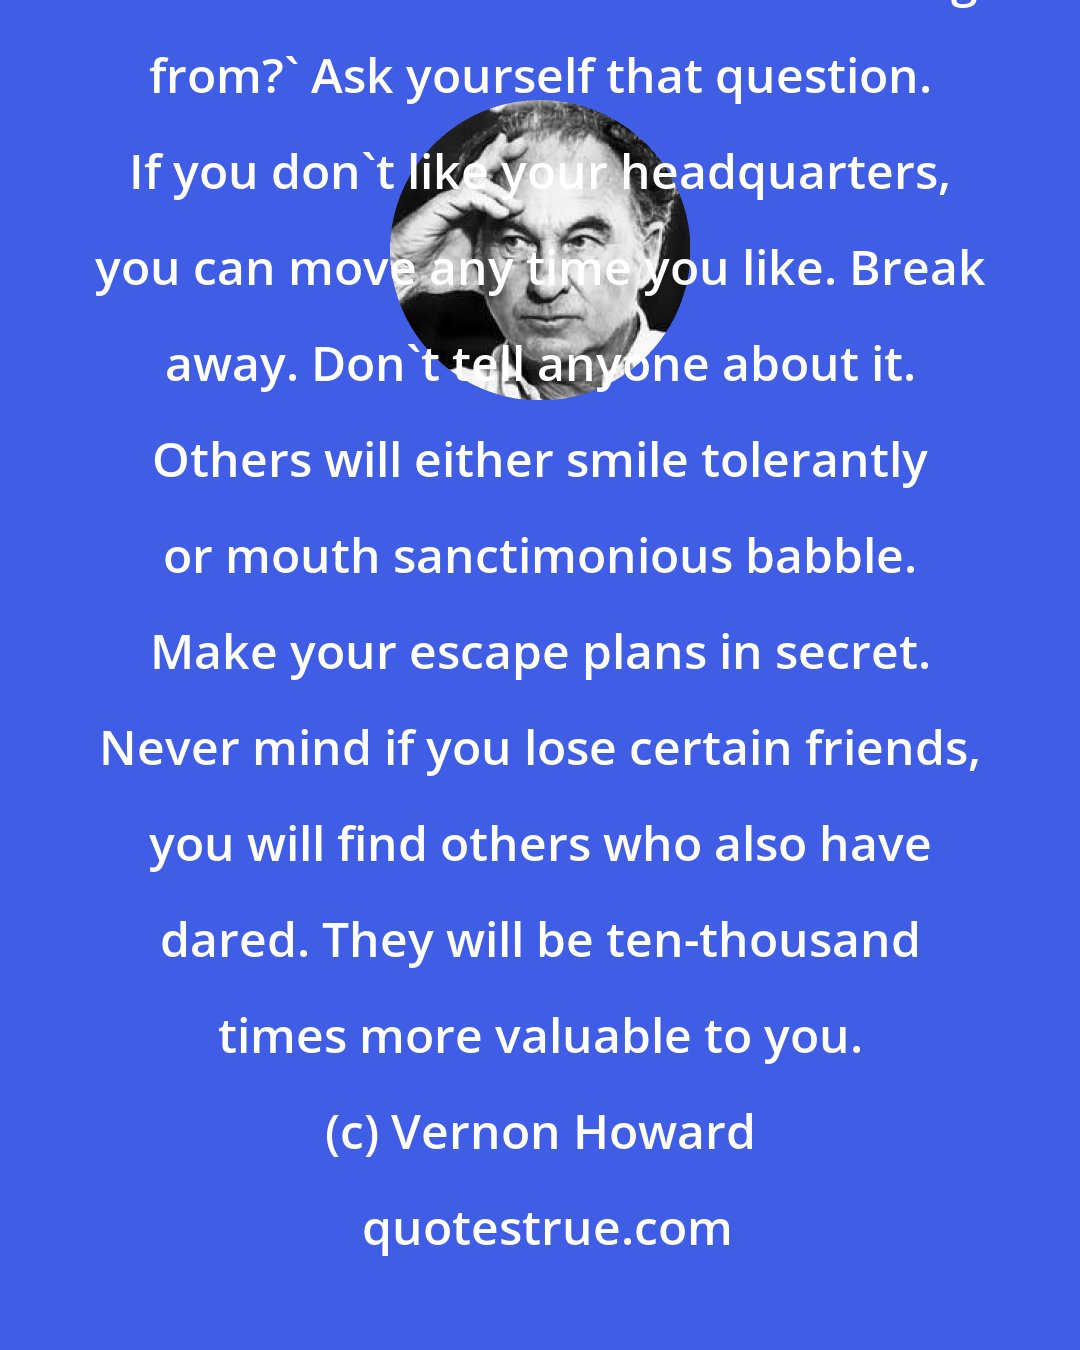 Vernon Howard: You see everything depends upon the psychological headquarters from which we live. 'Where am I living from?' Ask yourself that question. If you don't like your headquarters, you can move any time you like. Break away. Don't tell anyone about it. Others will either smile tolerantly or mouth sanctimonious babble. Make your escape plans in secret. Never mind if you lose certain friends, you will find others who also have dared. They will be ten-thousand times more valuable to you.